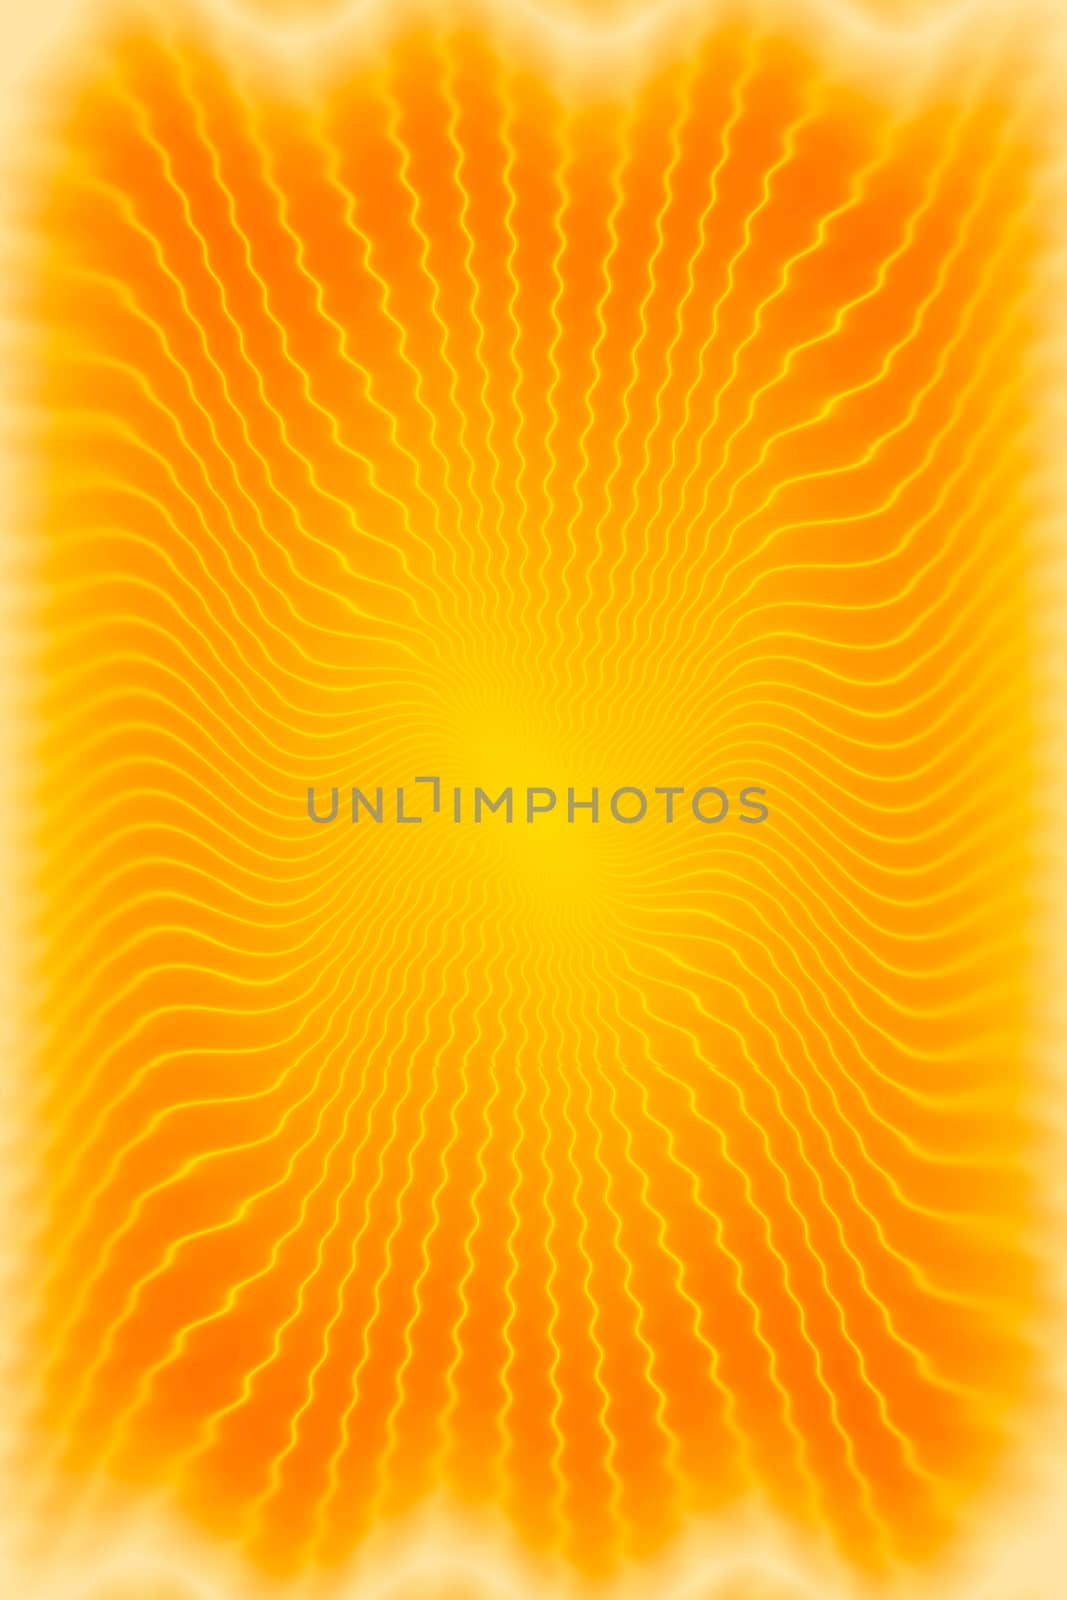 Abstract sunburst background or texture in warm colors